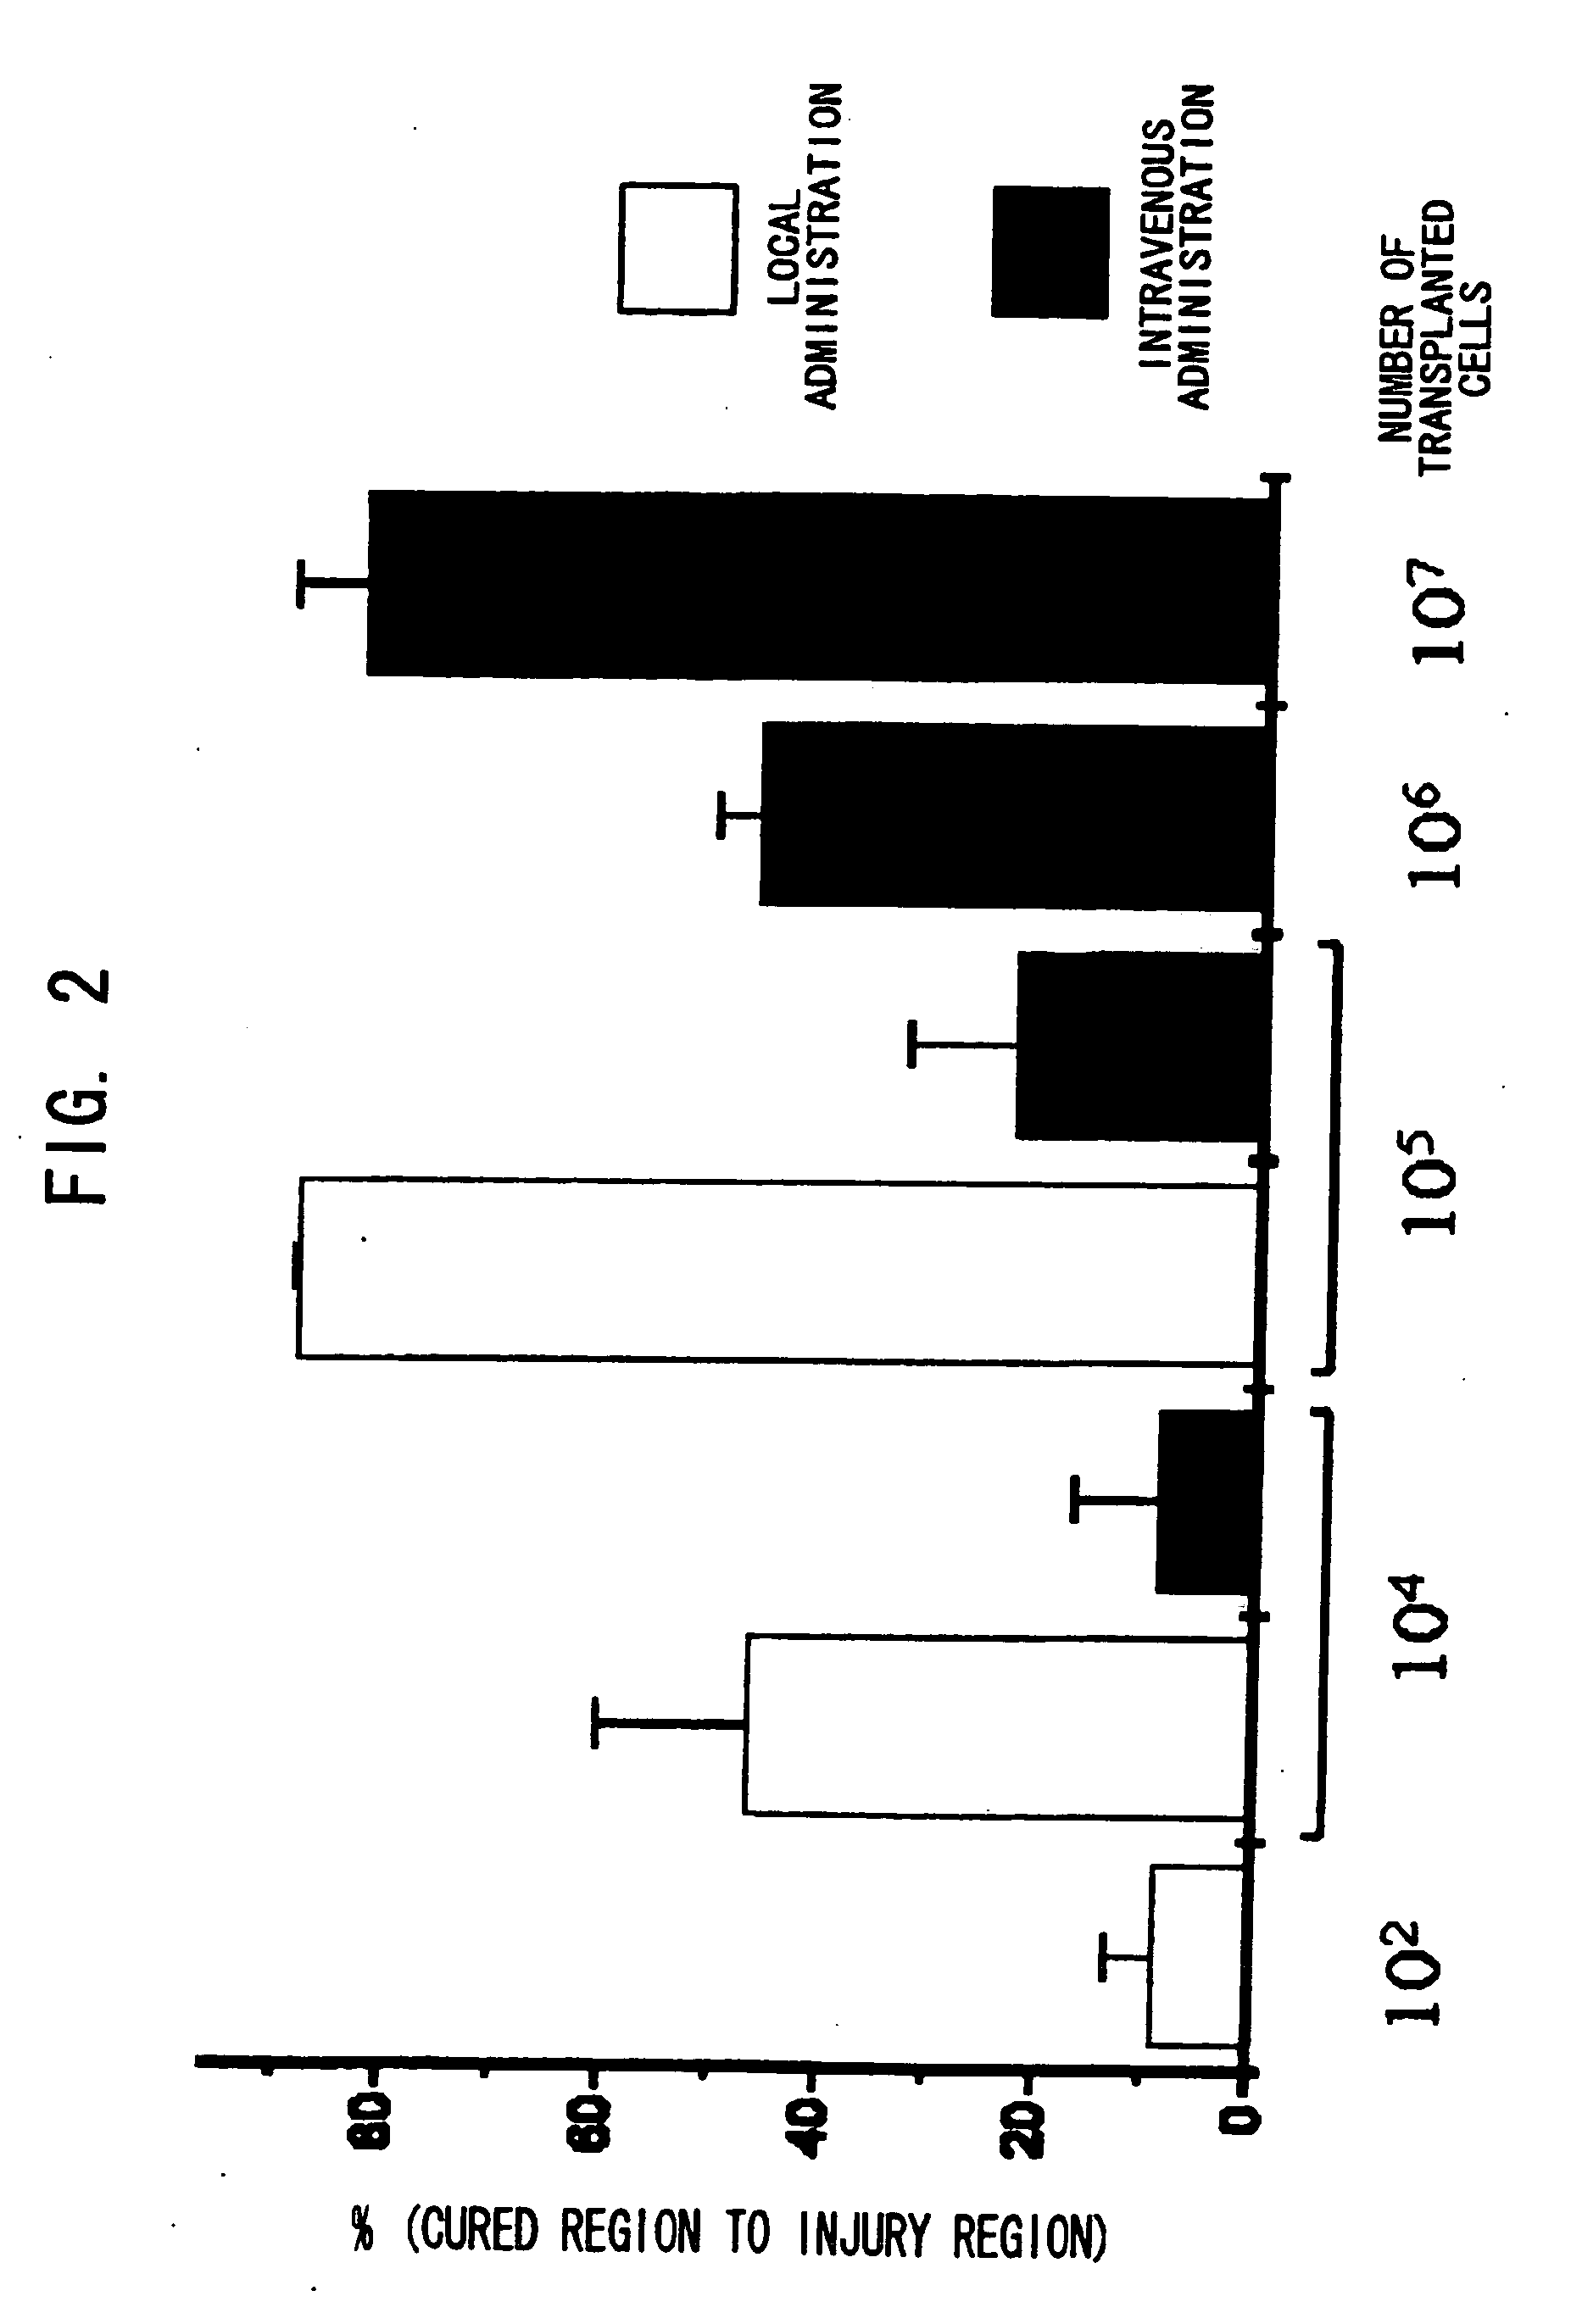 Internally administered therapeutic agents for cranial nerve diseases comprising mesenchymal cells as an active ingredient